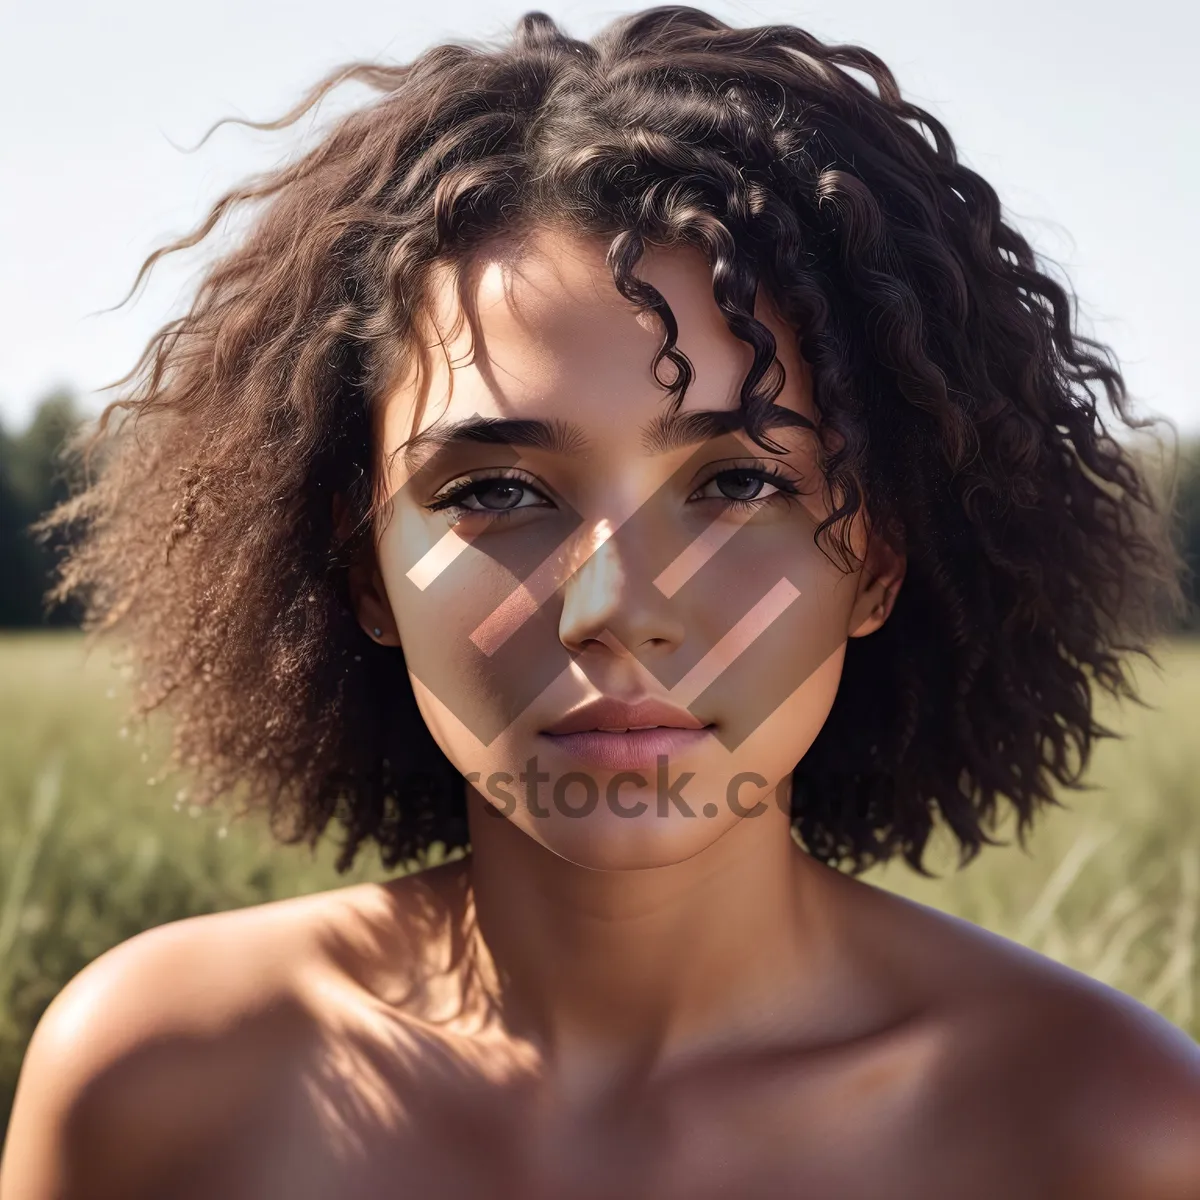 Picture of Sensual Afro Beauty: Fashionable Makeup and Stunning Curly Hair